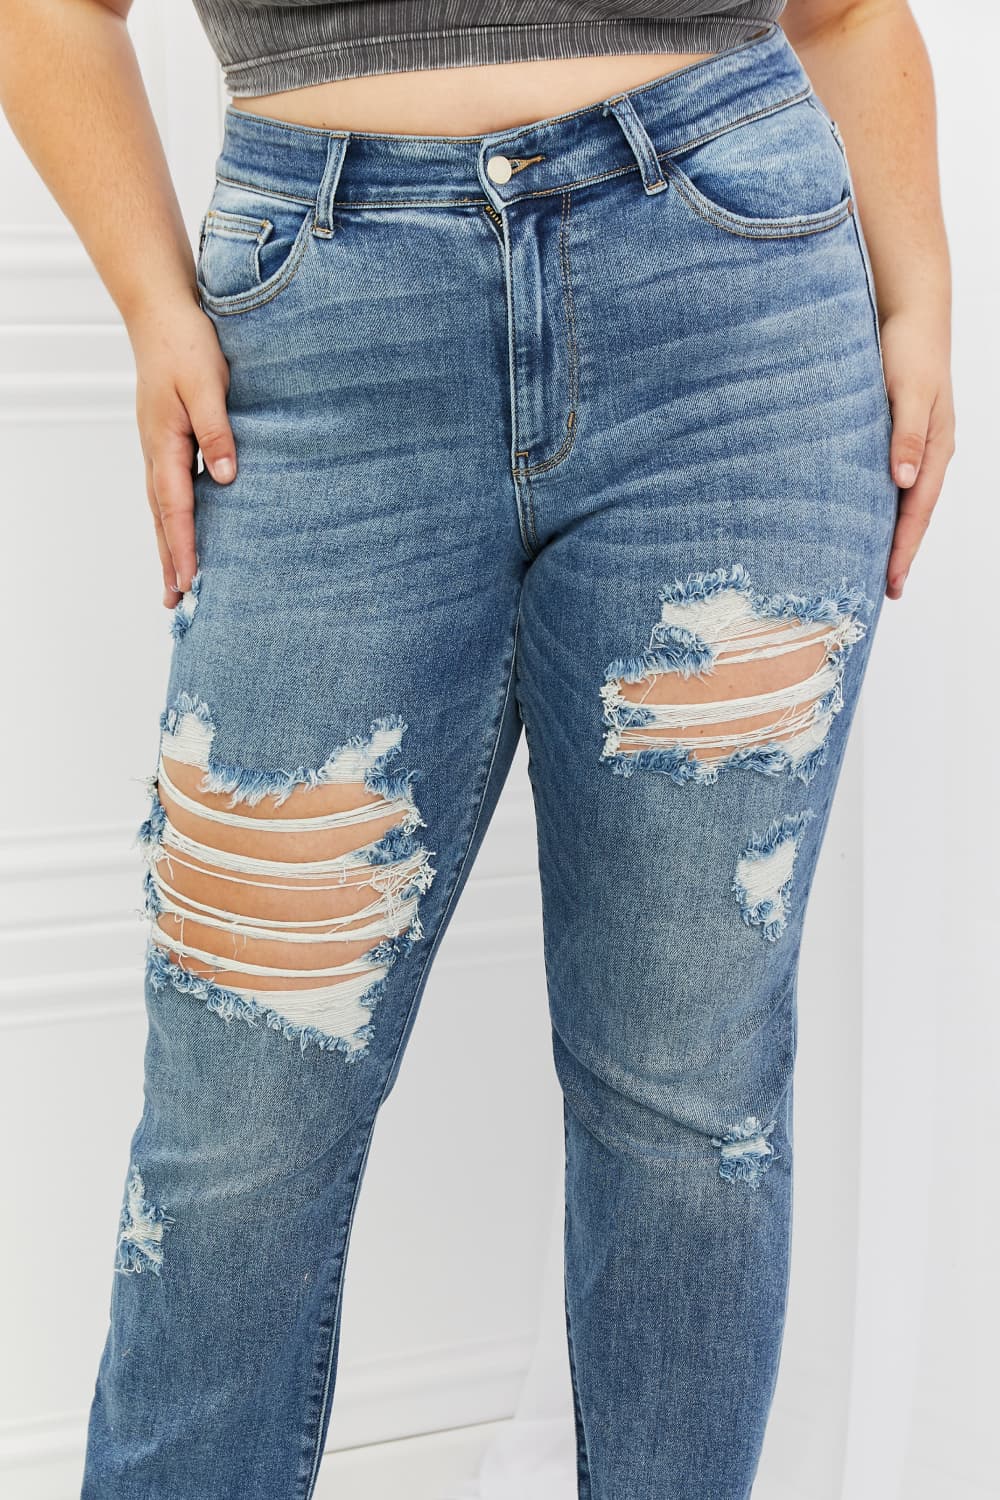 Full Size Distressed Straight Jeans